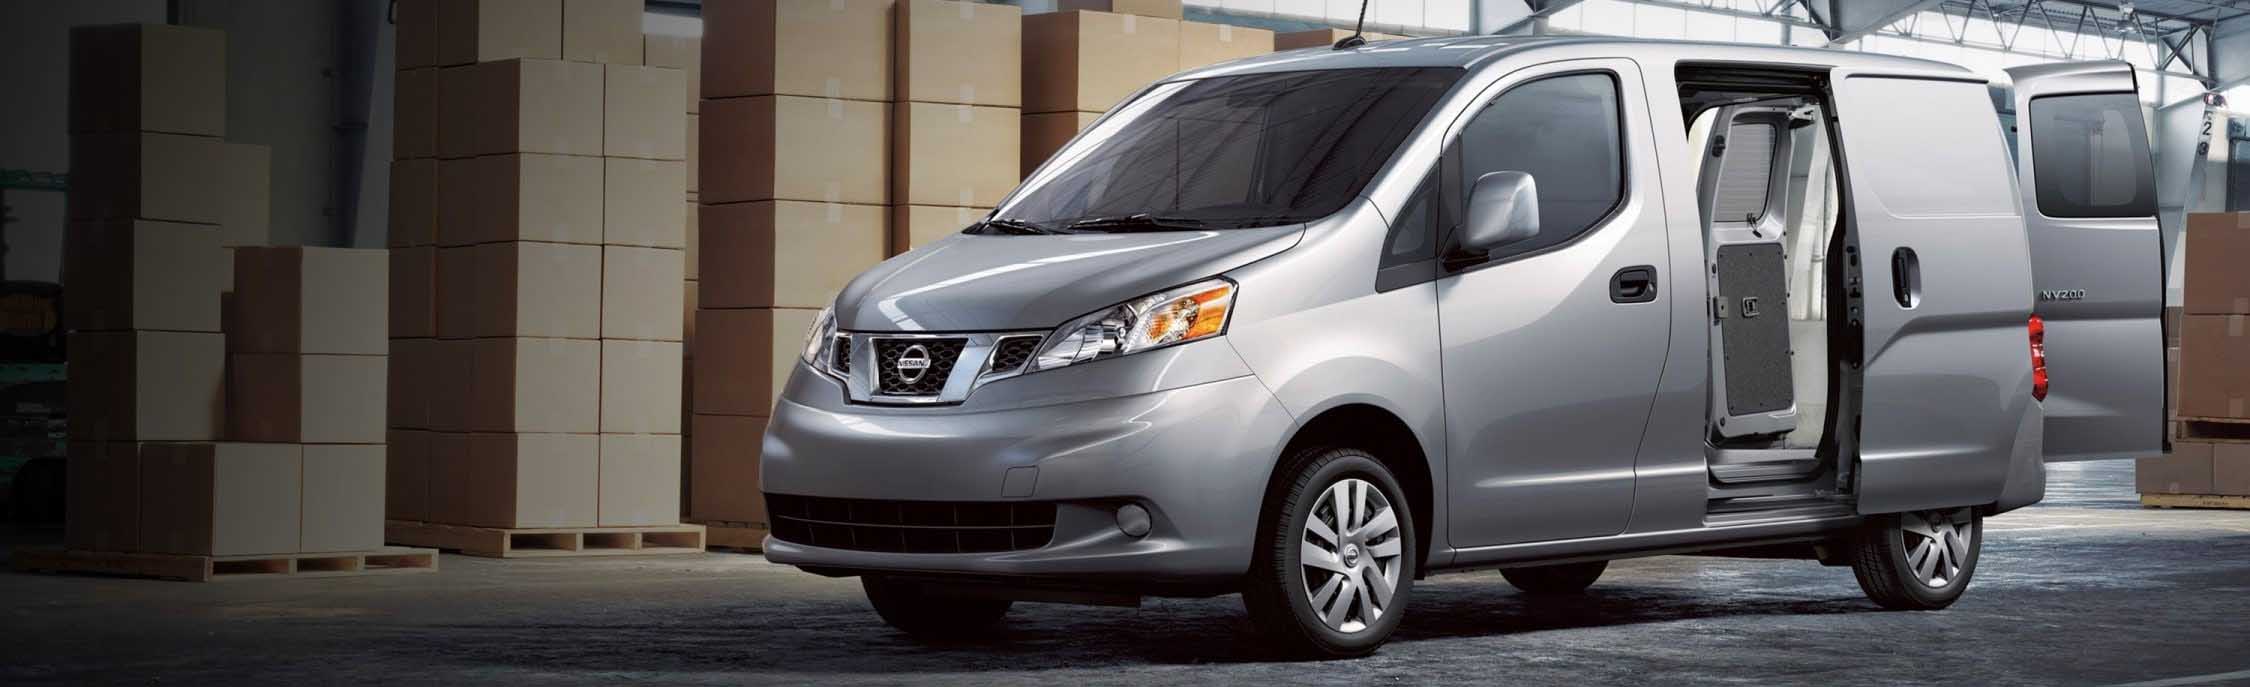 2020 NV200 Compact Cargo Vans Near Me Tomball TX, Houston, Aldine, Conroe,  The Woodlands